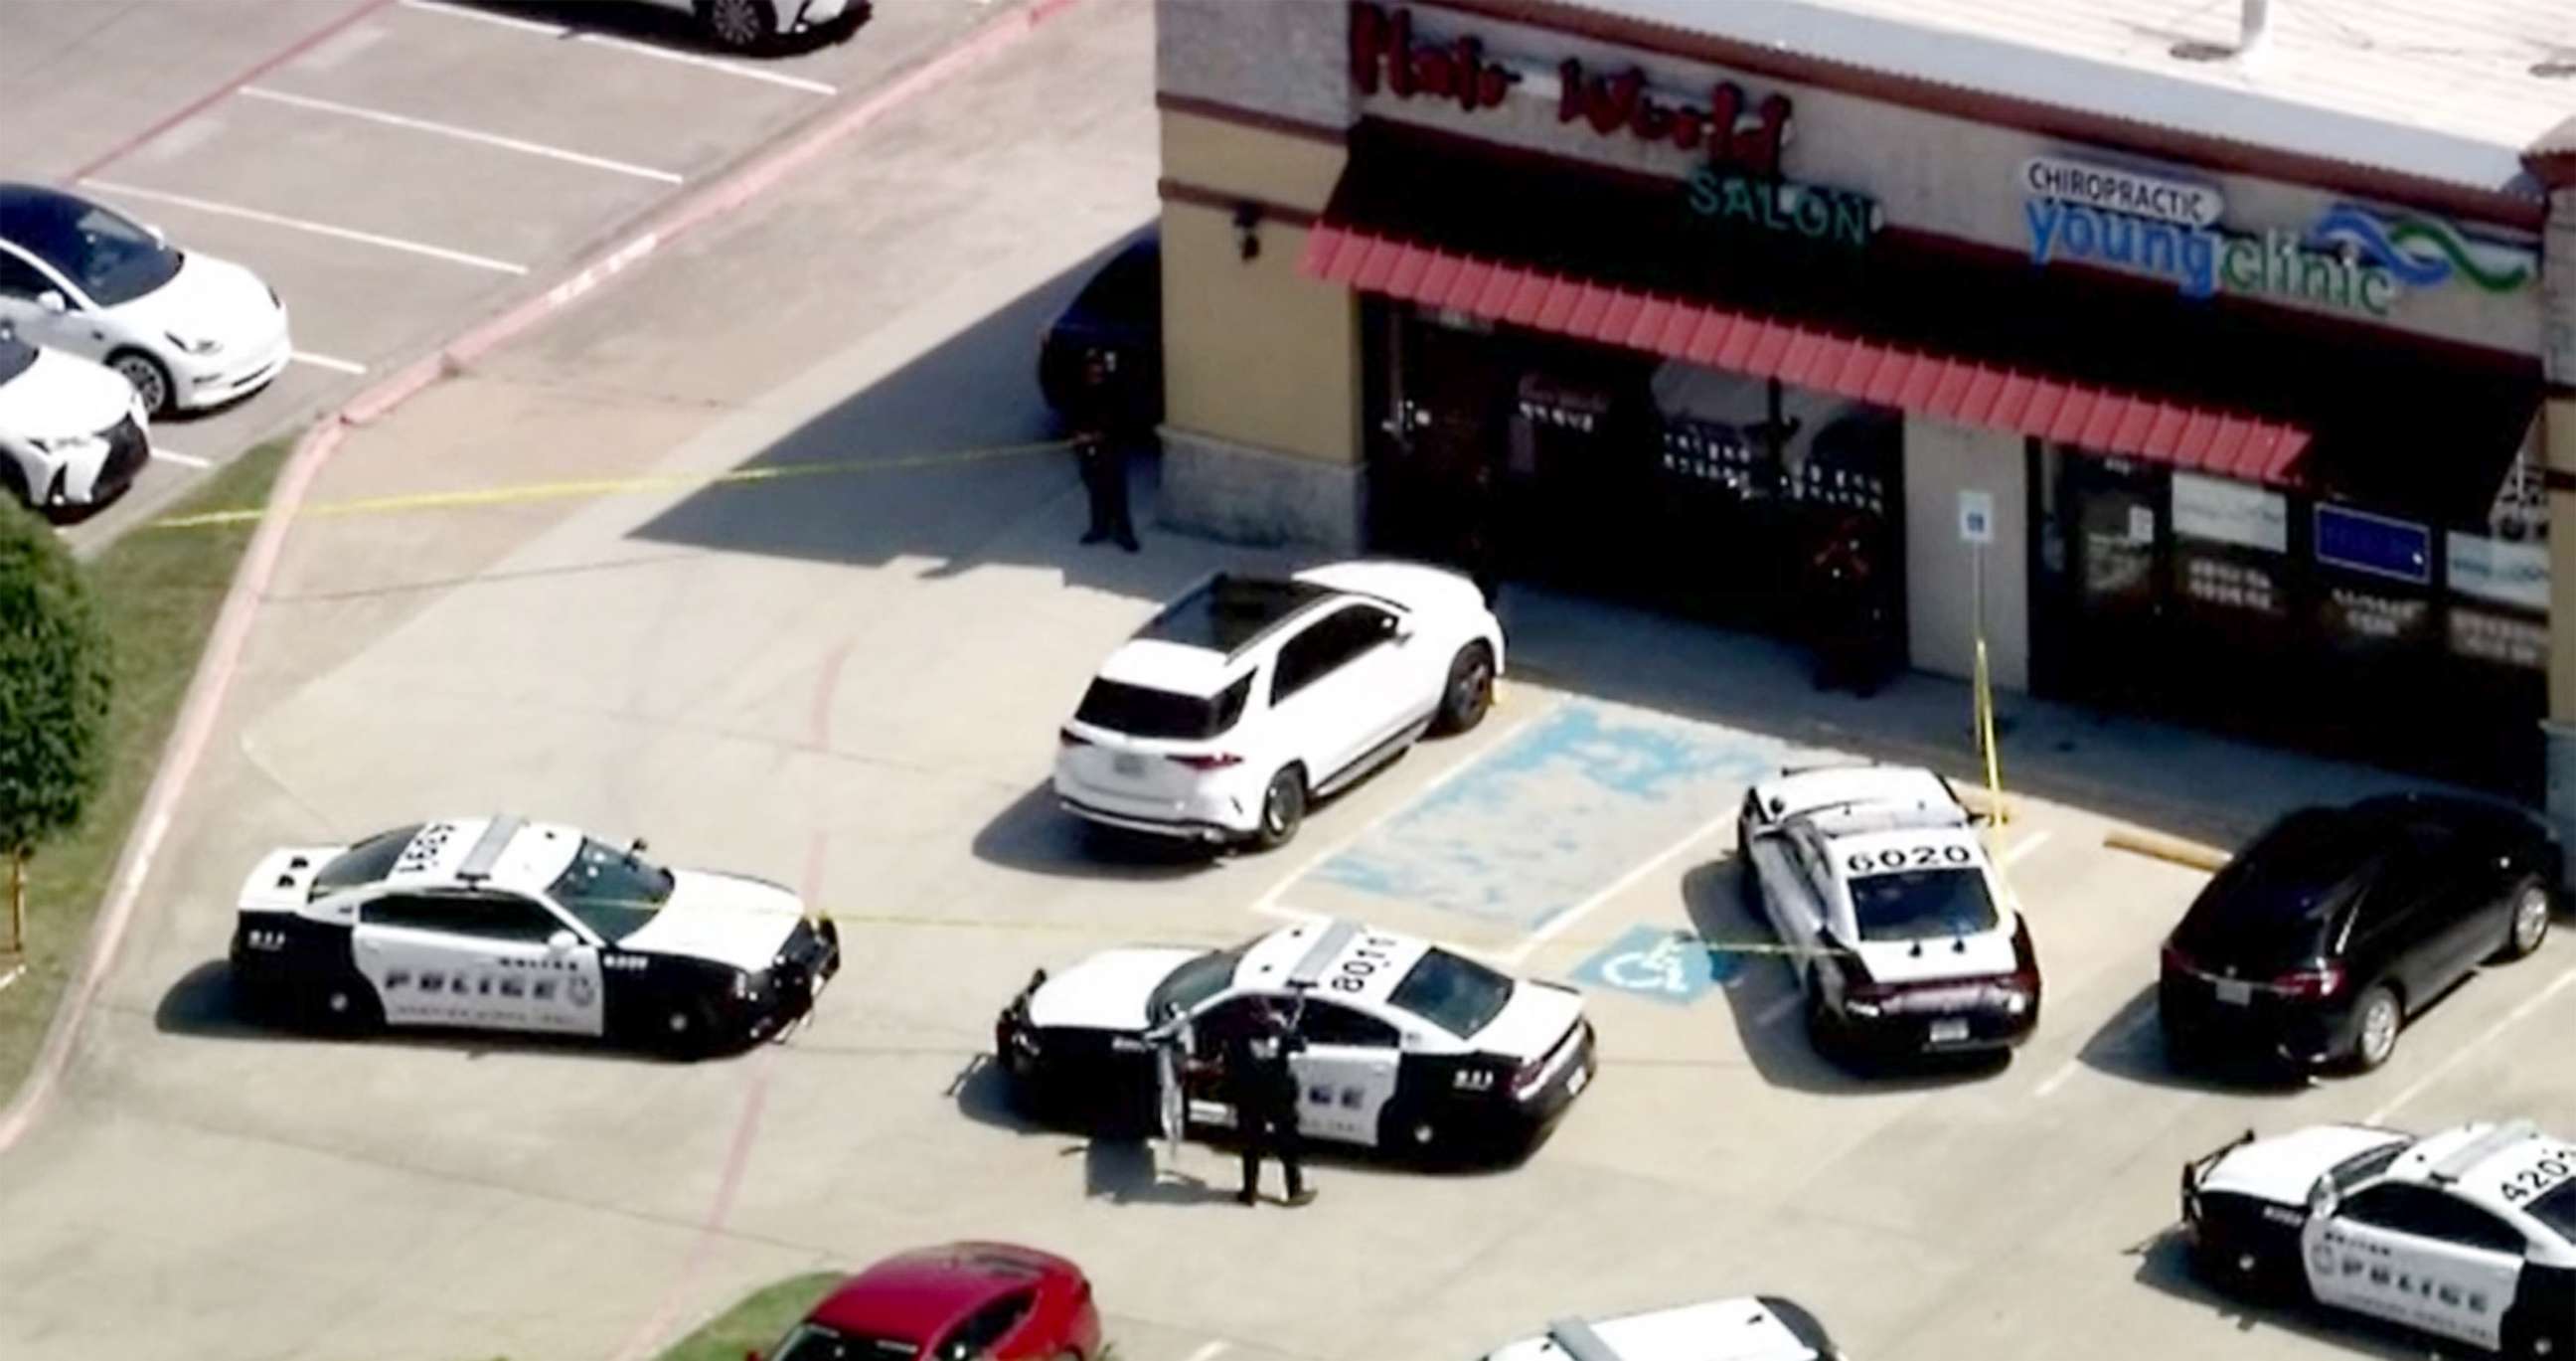 PHOTO: Police respond to the scene of a shooting at a salon in Dallas, May 11, 2022.